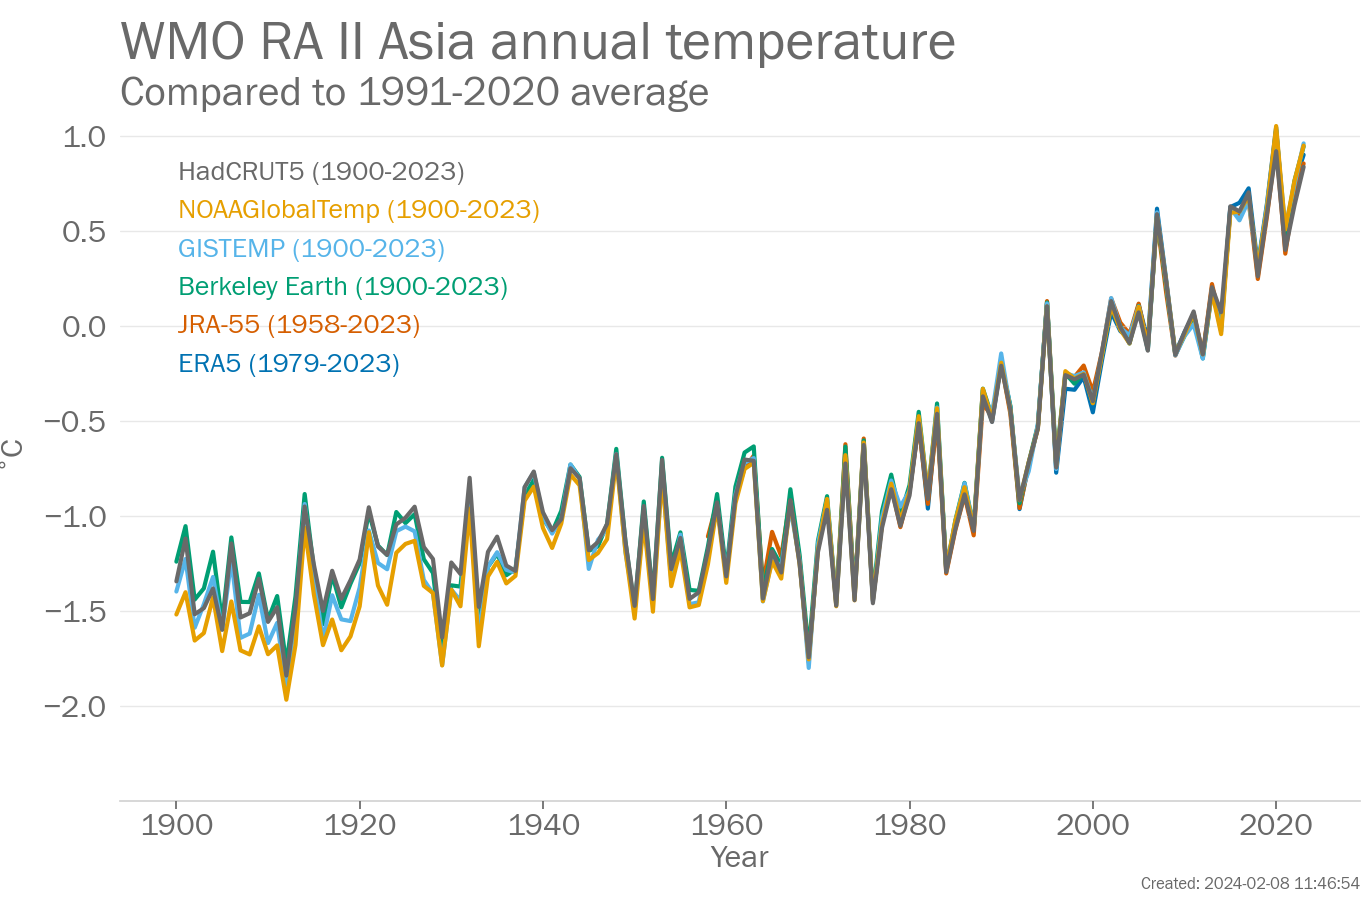 Annual Regional mean temperature for WMO RA 2 Asia (°C, difference from the 1991-2020 average)  from 1900-2023. Data are from the following six data sets: Berkeley Earth, ERA5, GISTEMP, HadCRUT5, JRA-55, NOAAGlobalTemp.